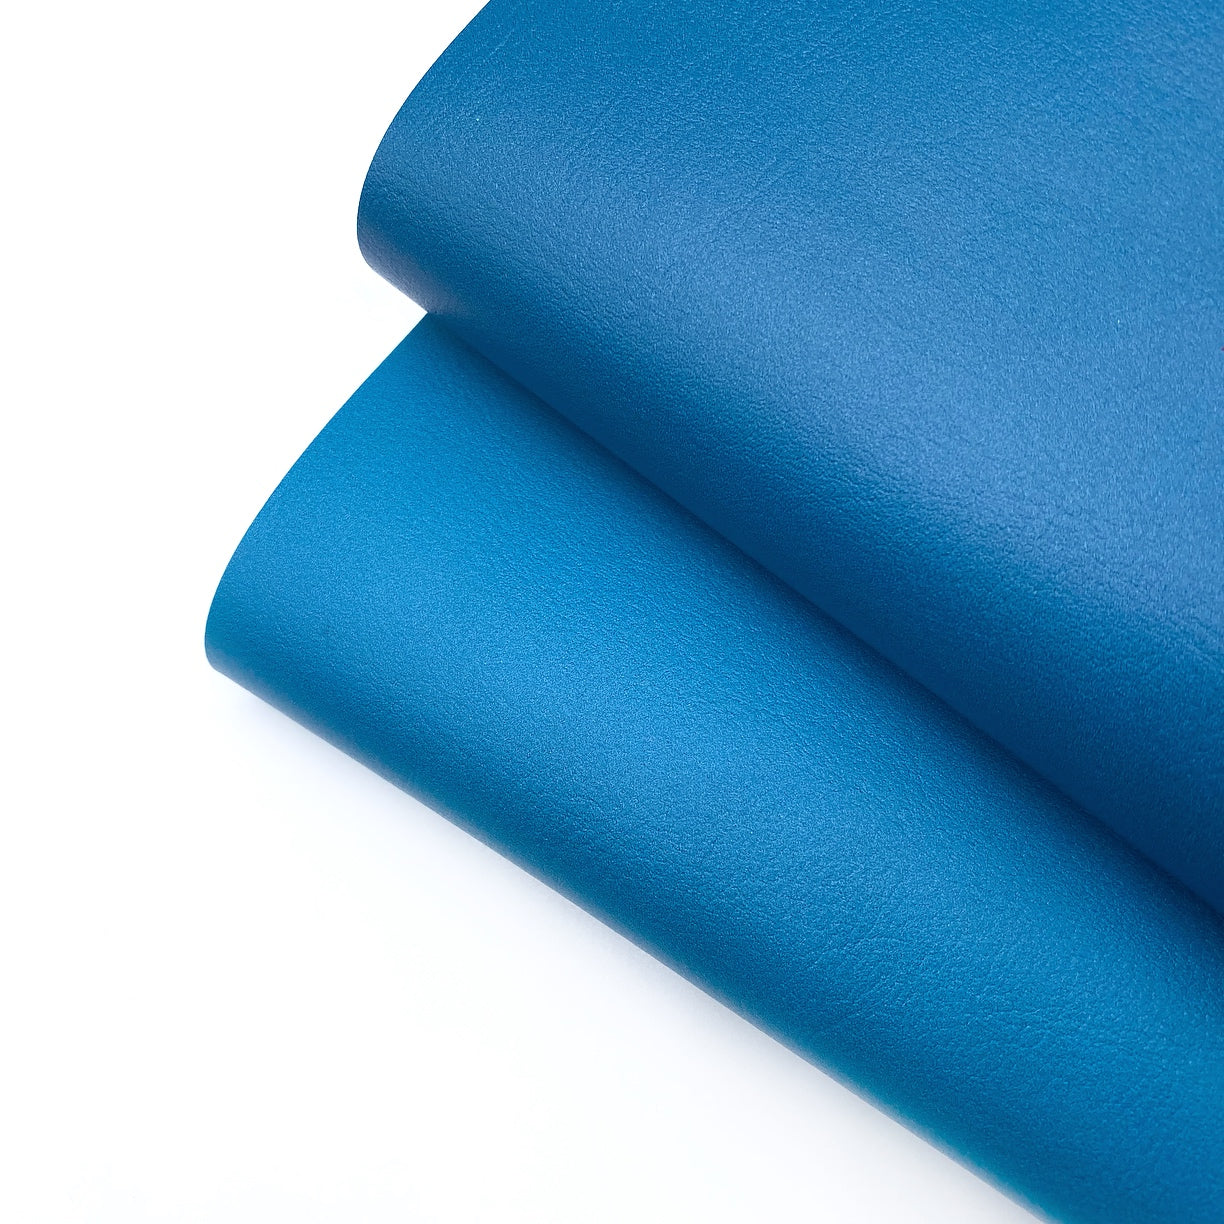 Totally Teal Premium Faux Leather Fabric Sheets